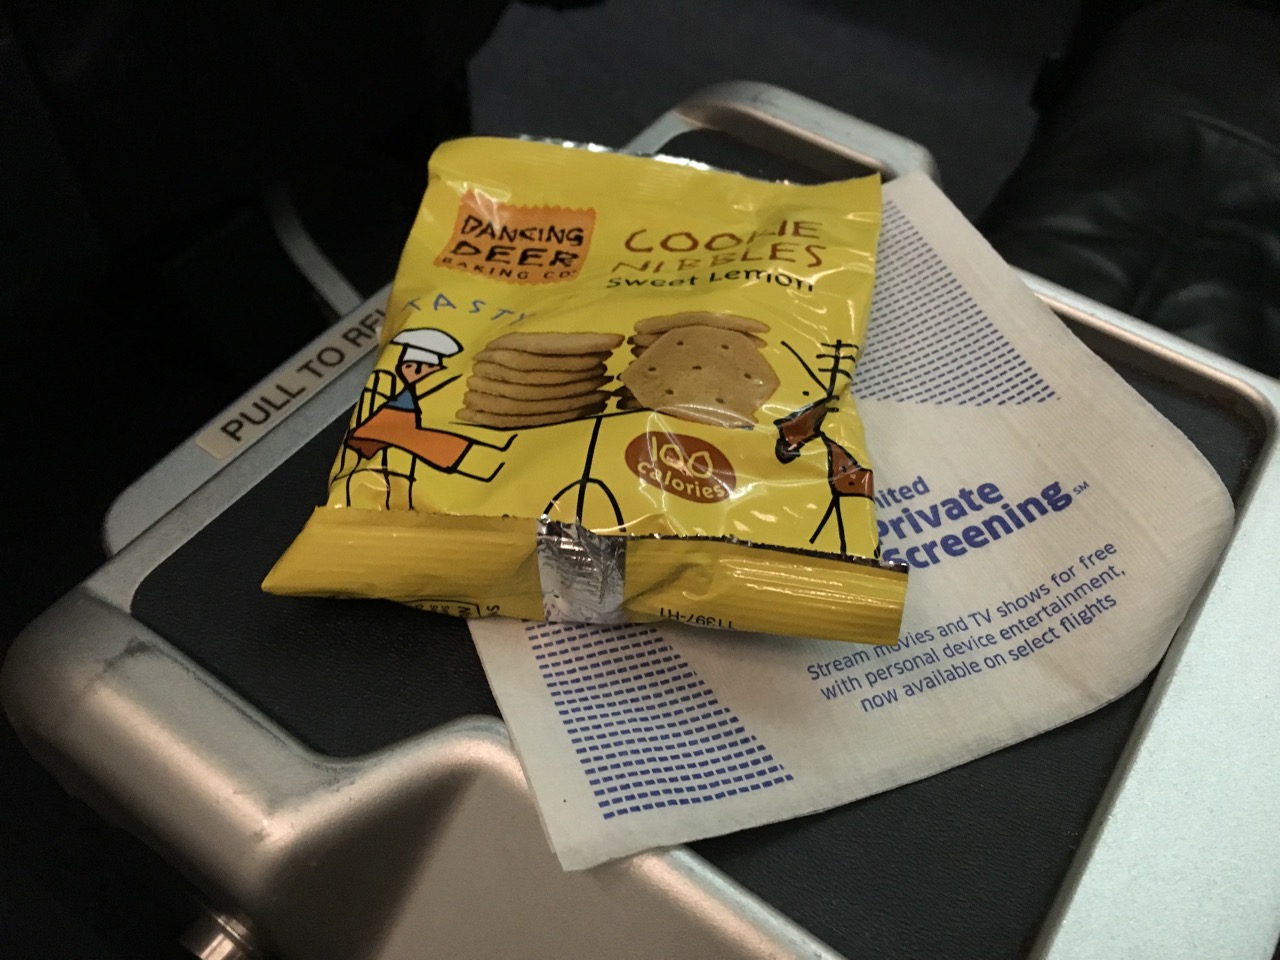 United Airlines Domestic First Class "Premium" Snack